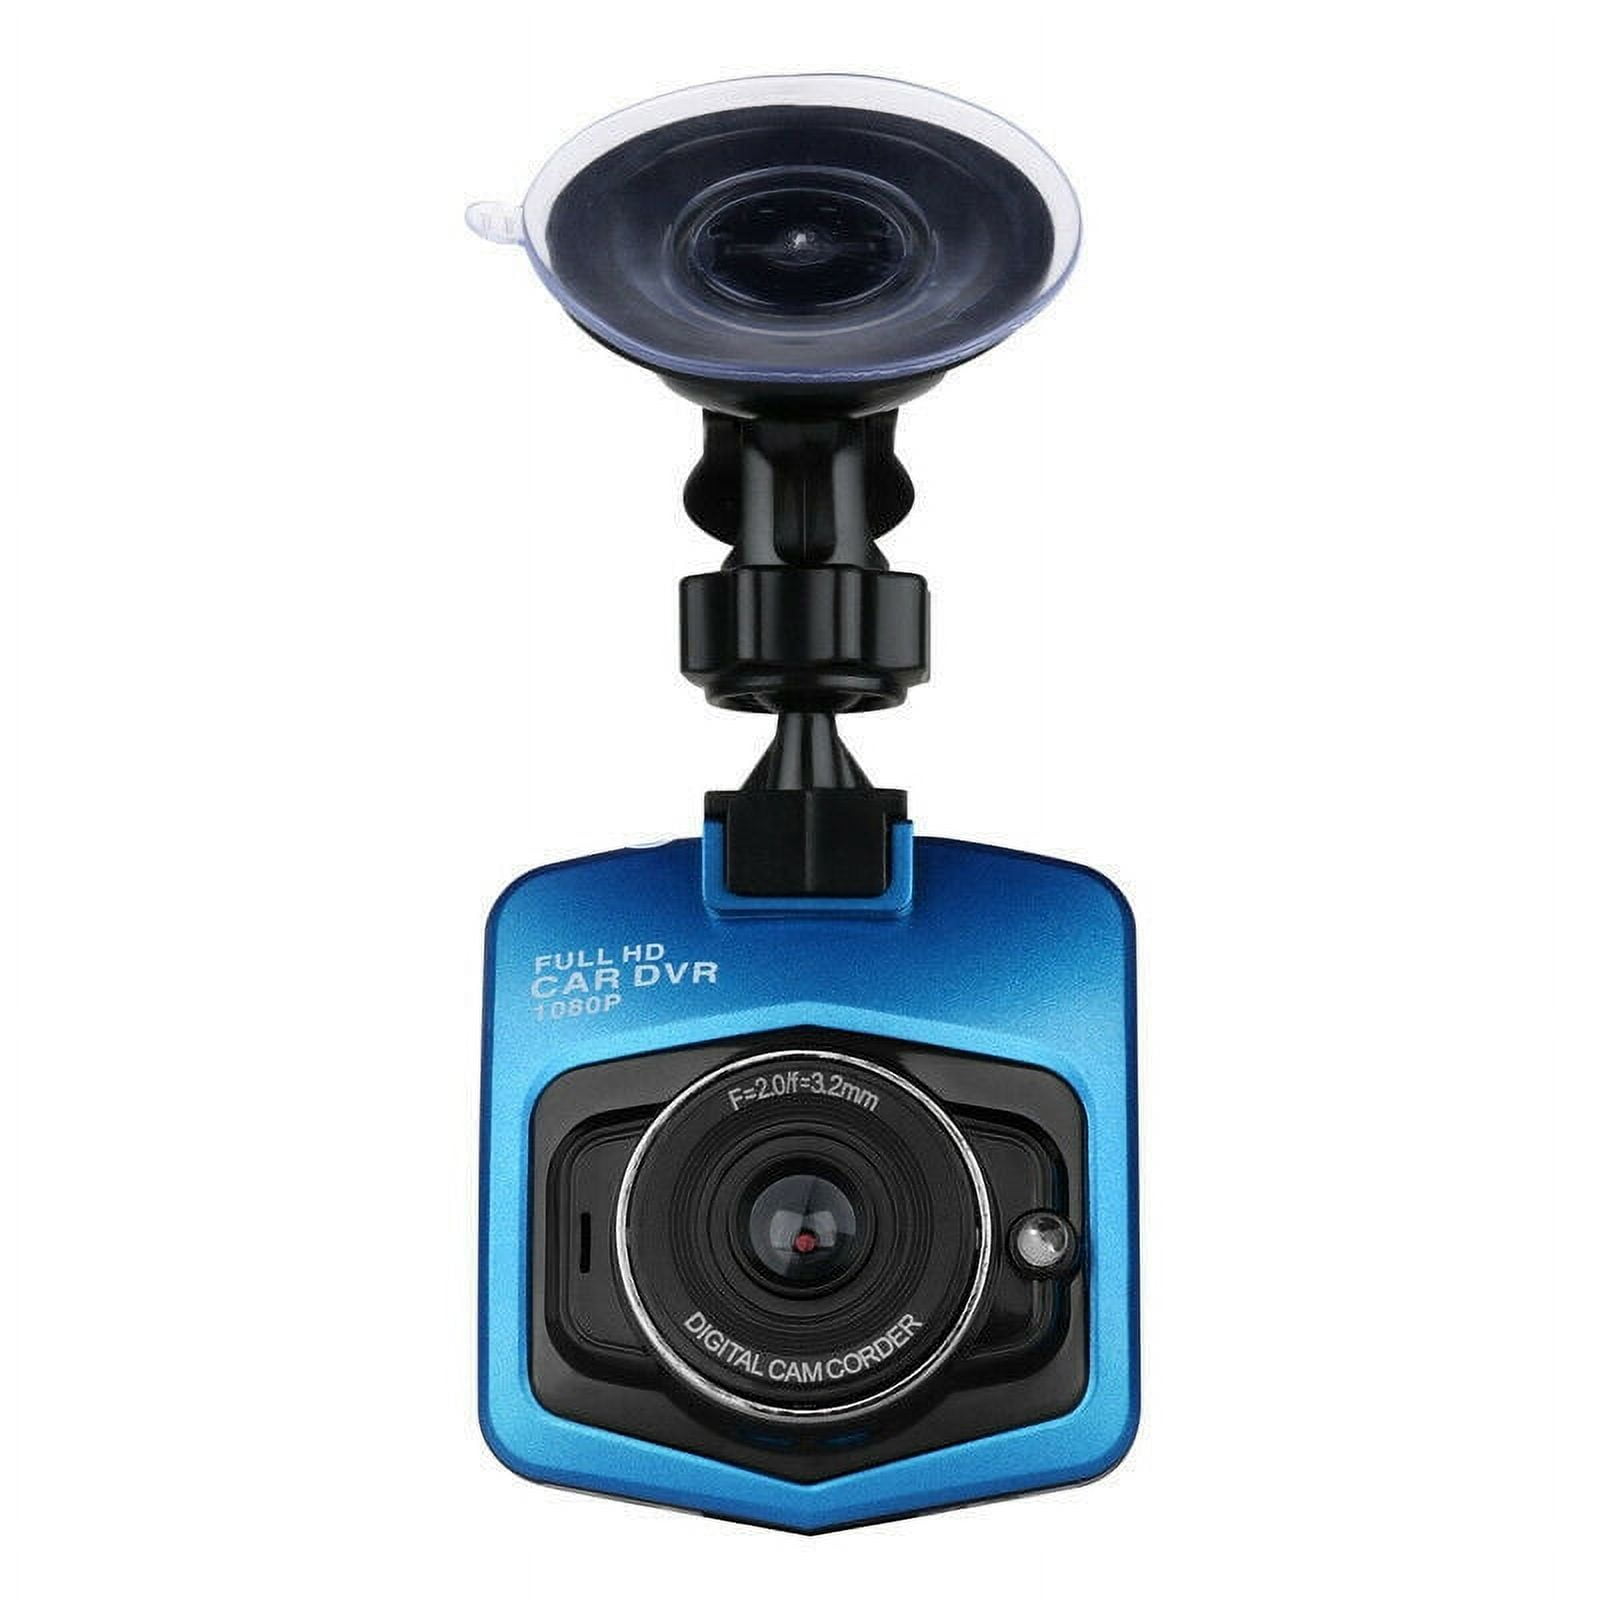 Buy Full HD Car DVR Vehicle Camera Video Recorder Dash Cam IR Day and 6 LED  Night Vision 270 degree wide view angle captures & 2.5 inch TFT LCD Screen  camera Online